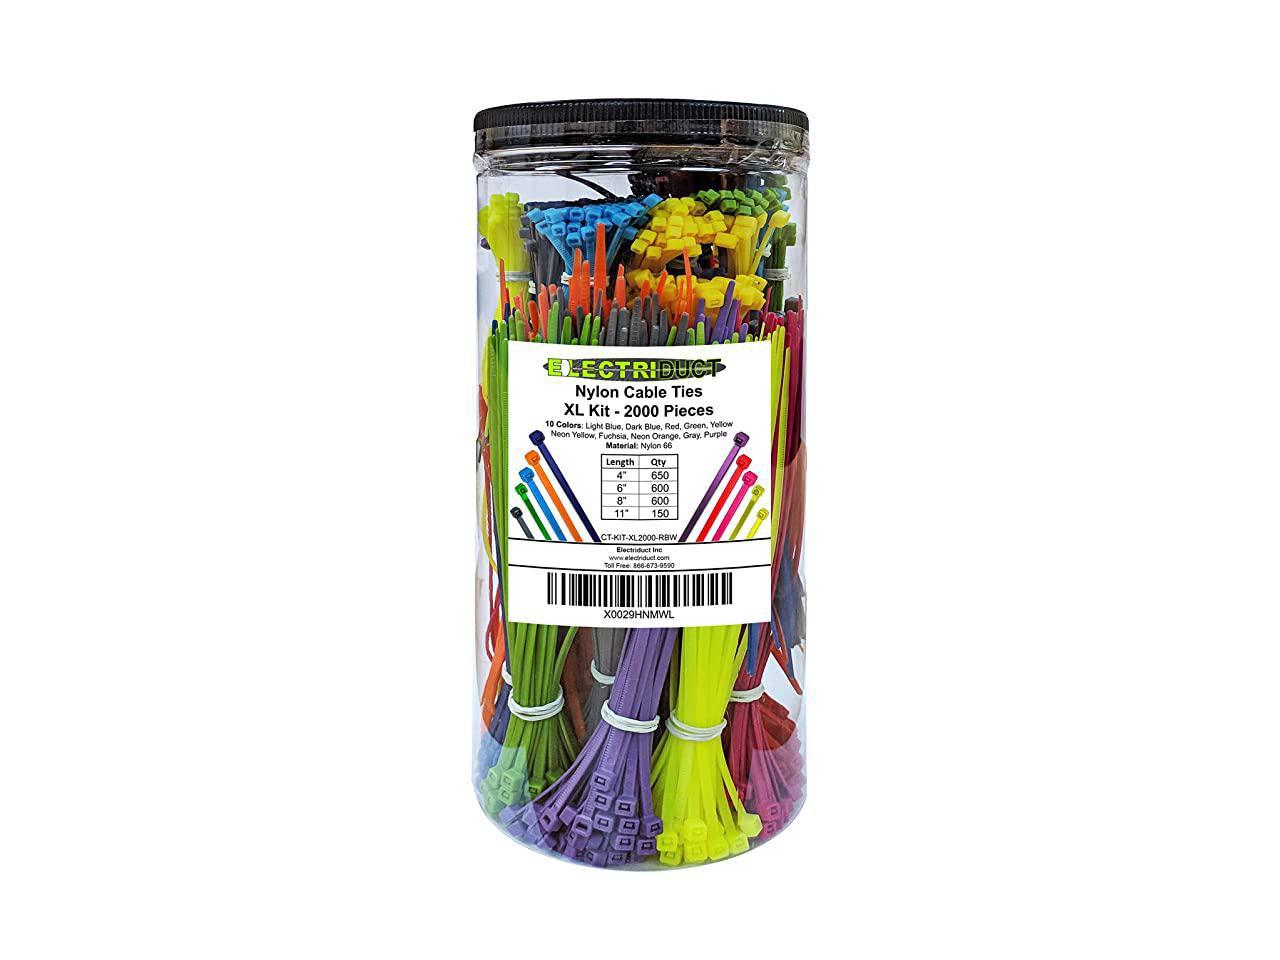 6 8 Multi Color 11 650 Zip Ties Blue, Red, Green, Yellow, Fuchsia, Orange, Gray, Purple Electriduct Nylon Cable Tie Kit - Assorted Lengths 4